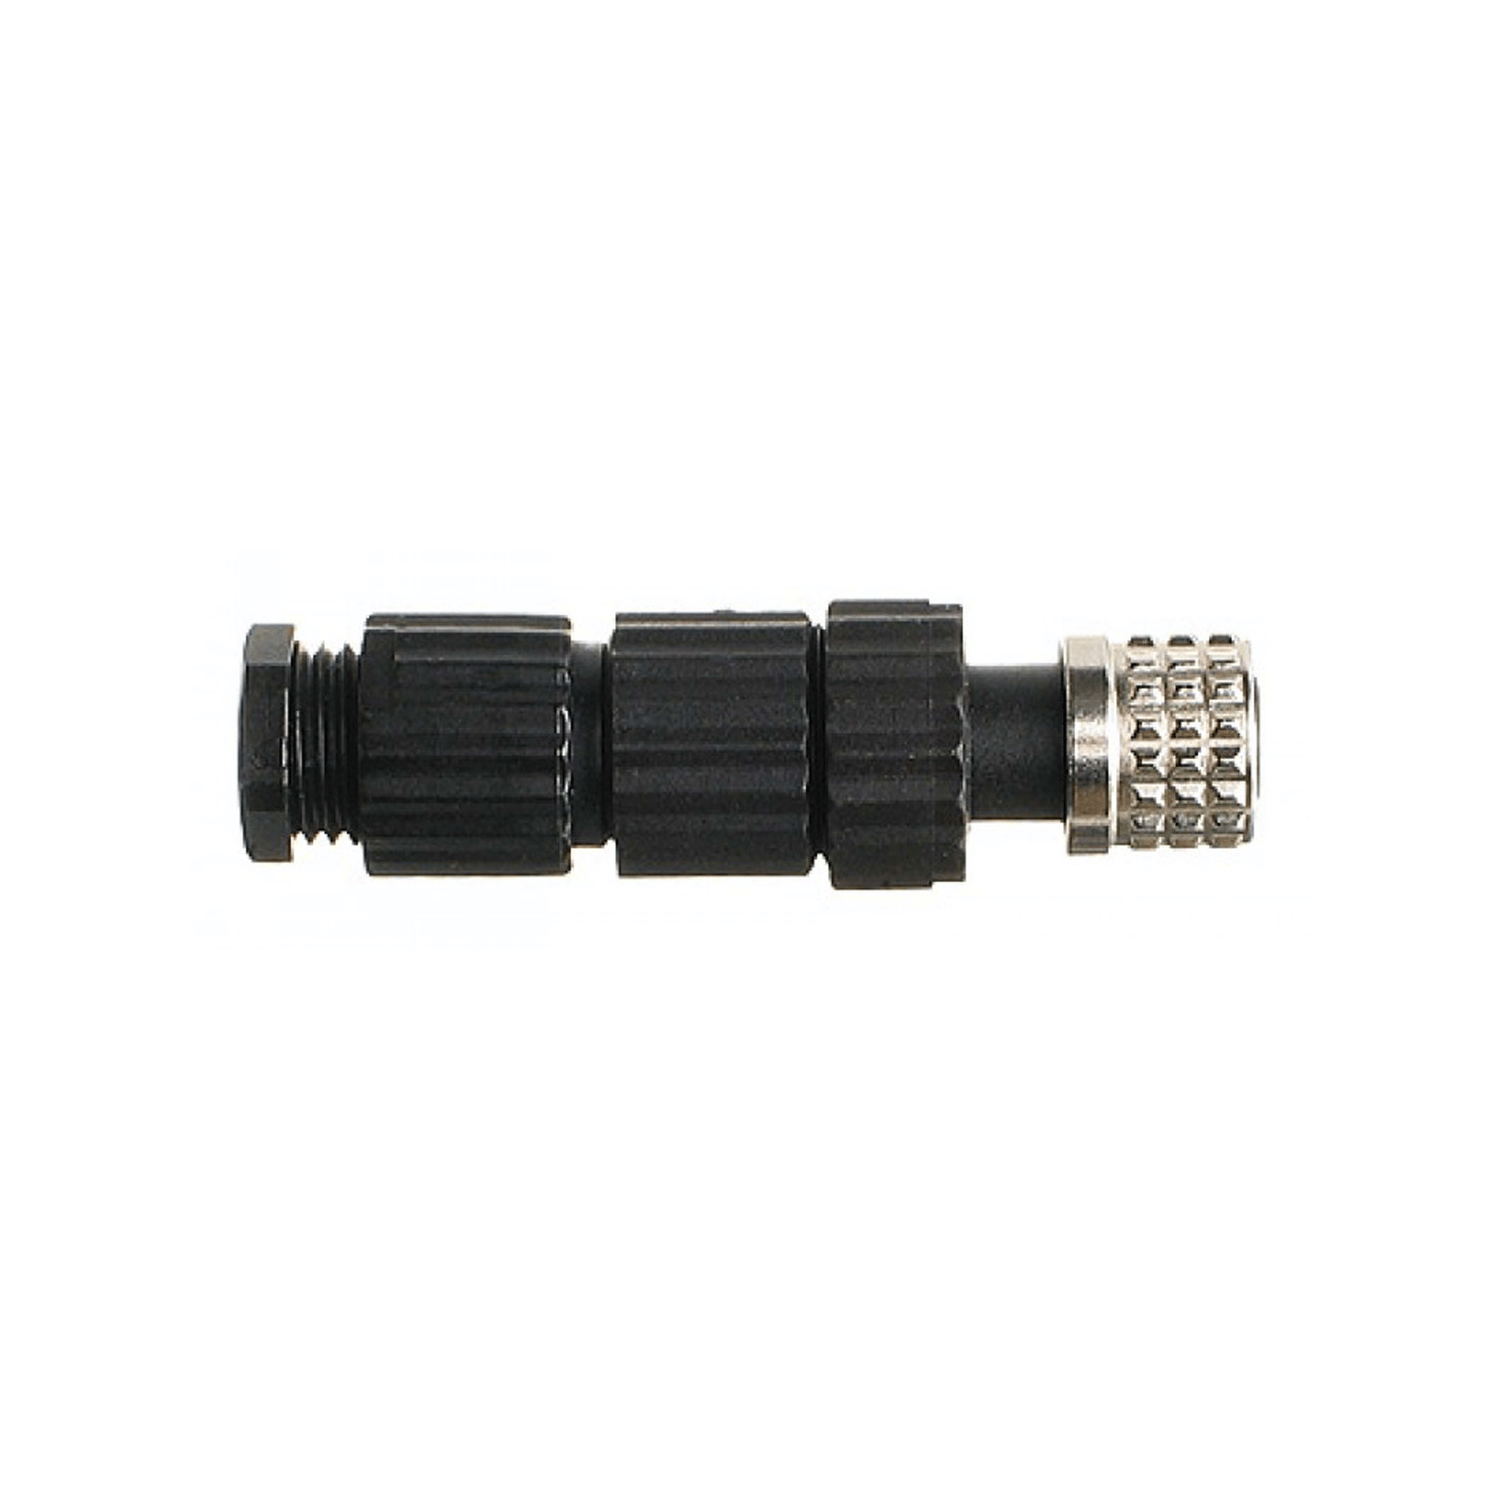 Plug SNP02, with protection IP67, connection to temperature sensor